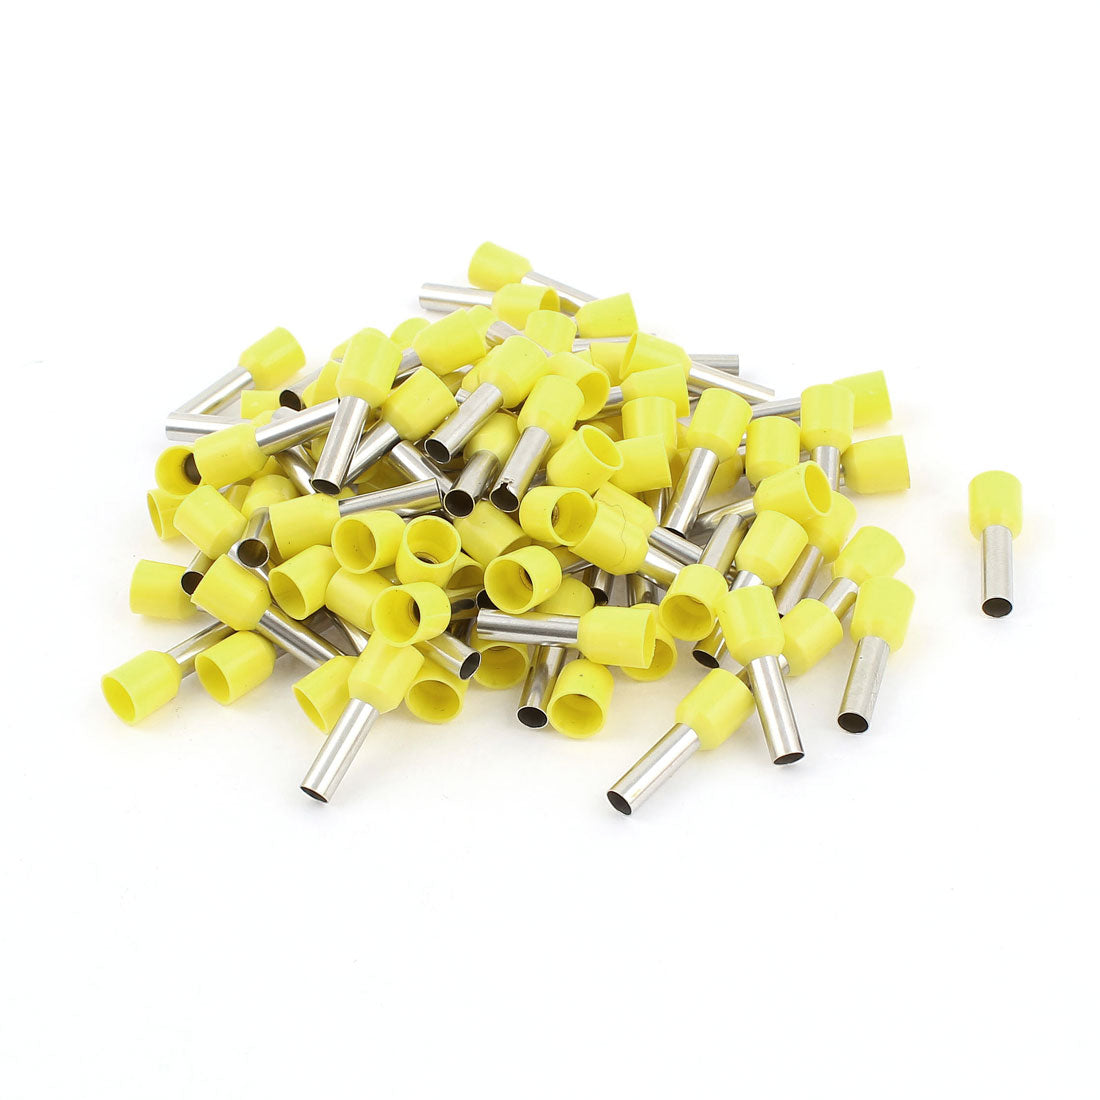 uxcell Uxcell 100 Pcs  6mm2 Crimp Cord Wire End Terminal Insulated Bootlace Ferrule Connector Yellow